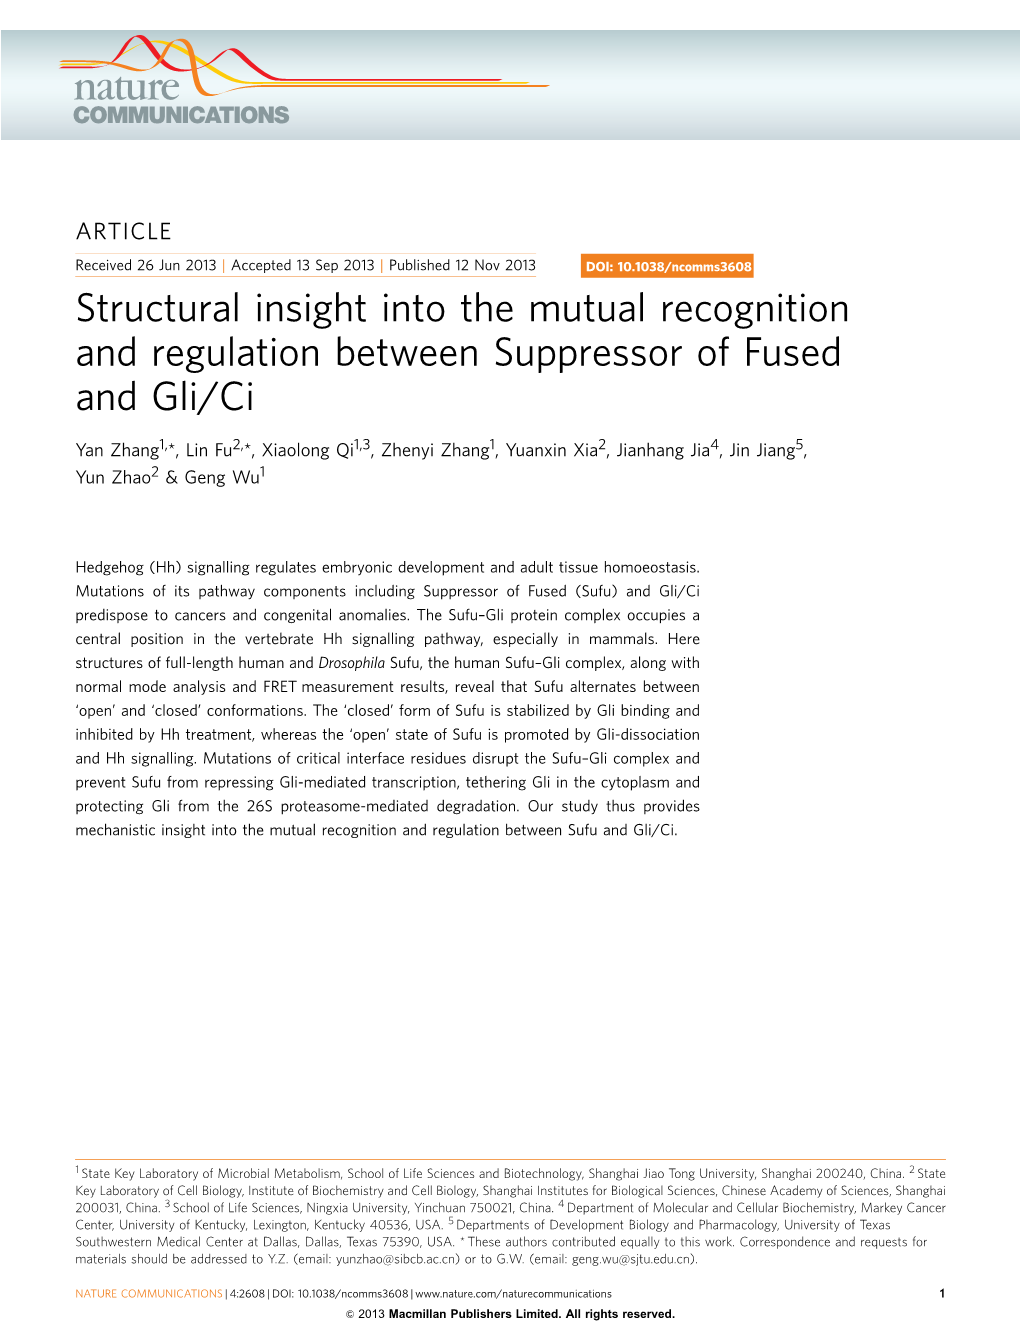 Structural Insight Into the Mutual Recognition and Regulation Between Suppressor of Fused and Gli/Ci